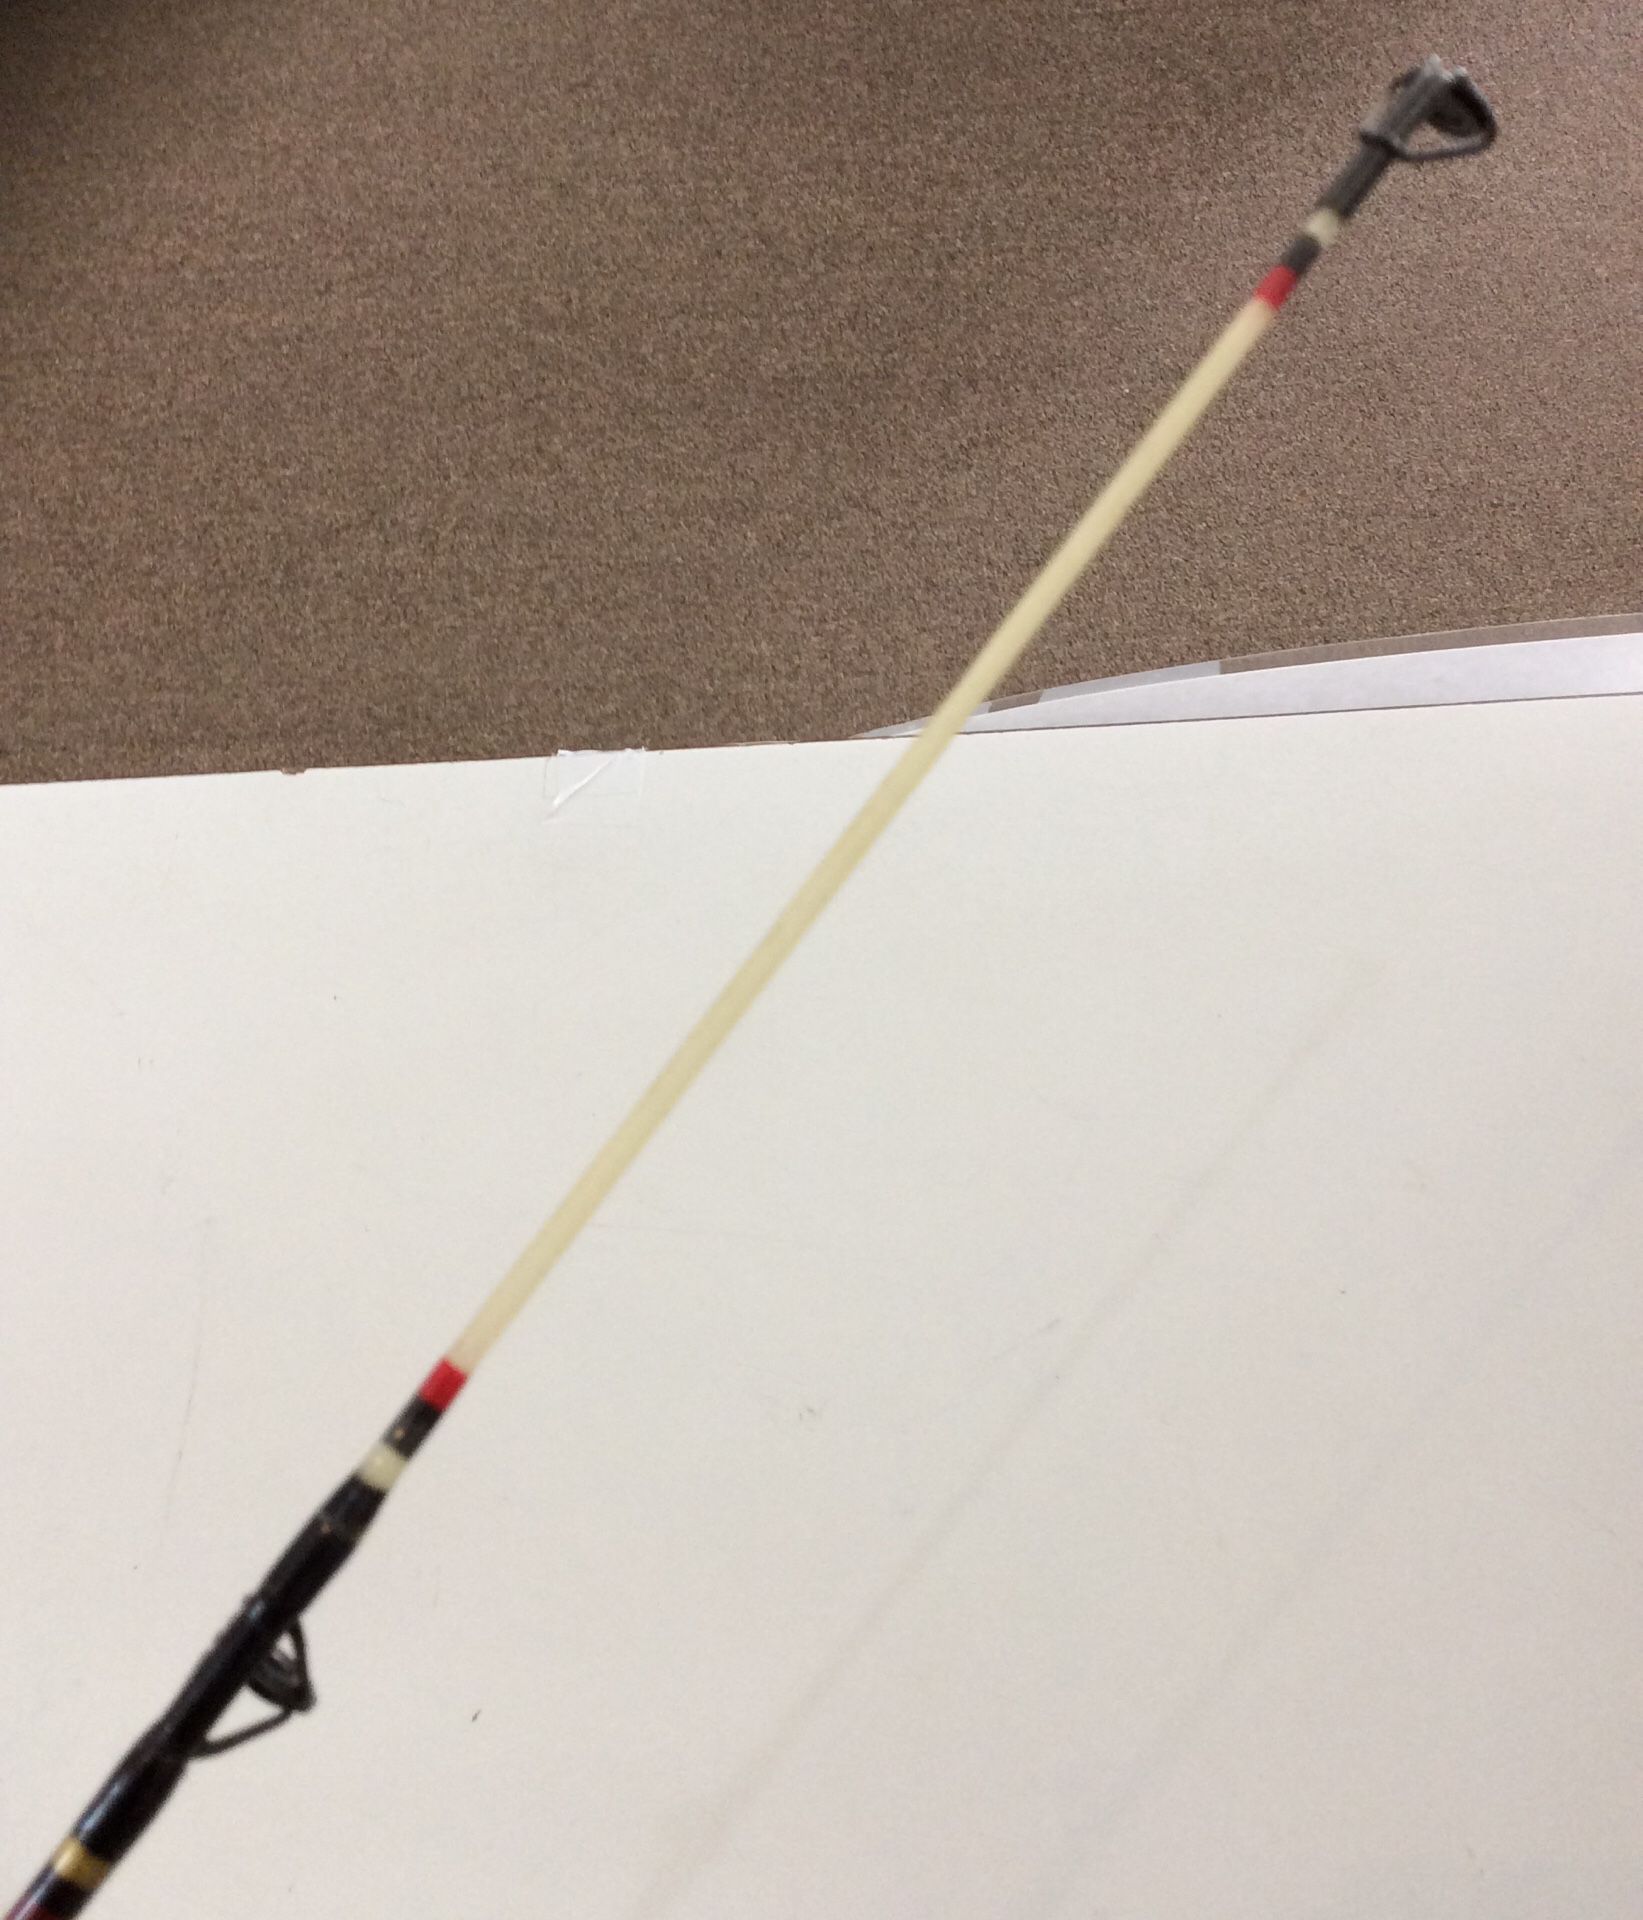 Zebco Rhino Glow Tip Fishing Rod 4004-115 for Sale in Rockford, IL - OfferUp